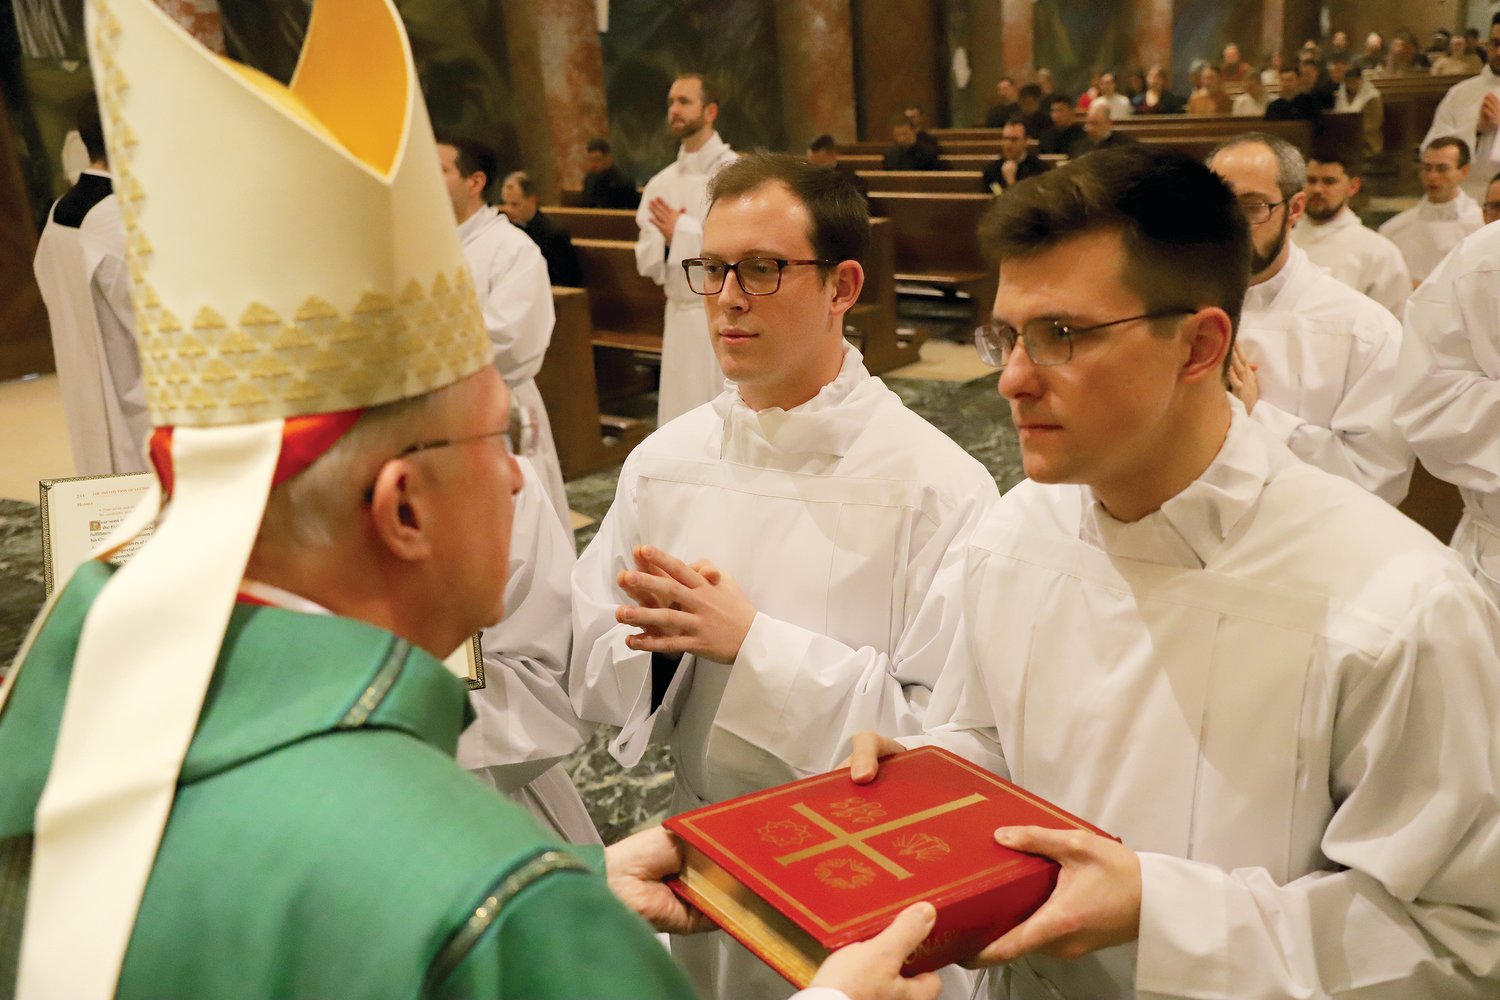 Twenty-five seminarians, including three young men from the Diocese of Providence: Stephen Coutcher, Nathan Ledoux and Mateusz Puzanowski receive the Ministry of Lector, conferred by His Eminence Arthur Cardinal Roche, Prefect of the Dicastery for Divine Worship and the Discipline of the Sacraments on January 15 in Rome.